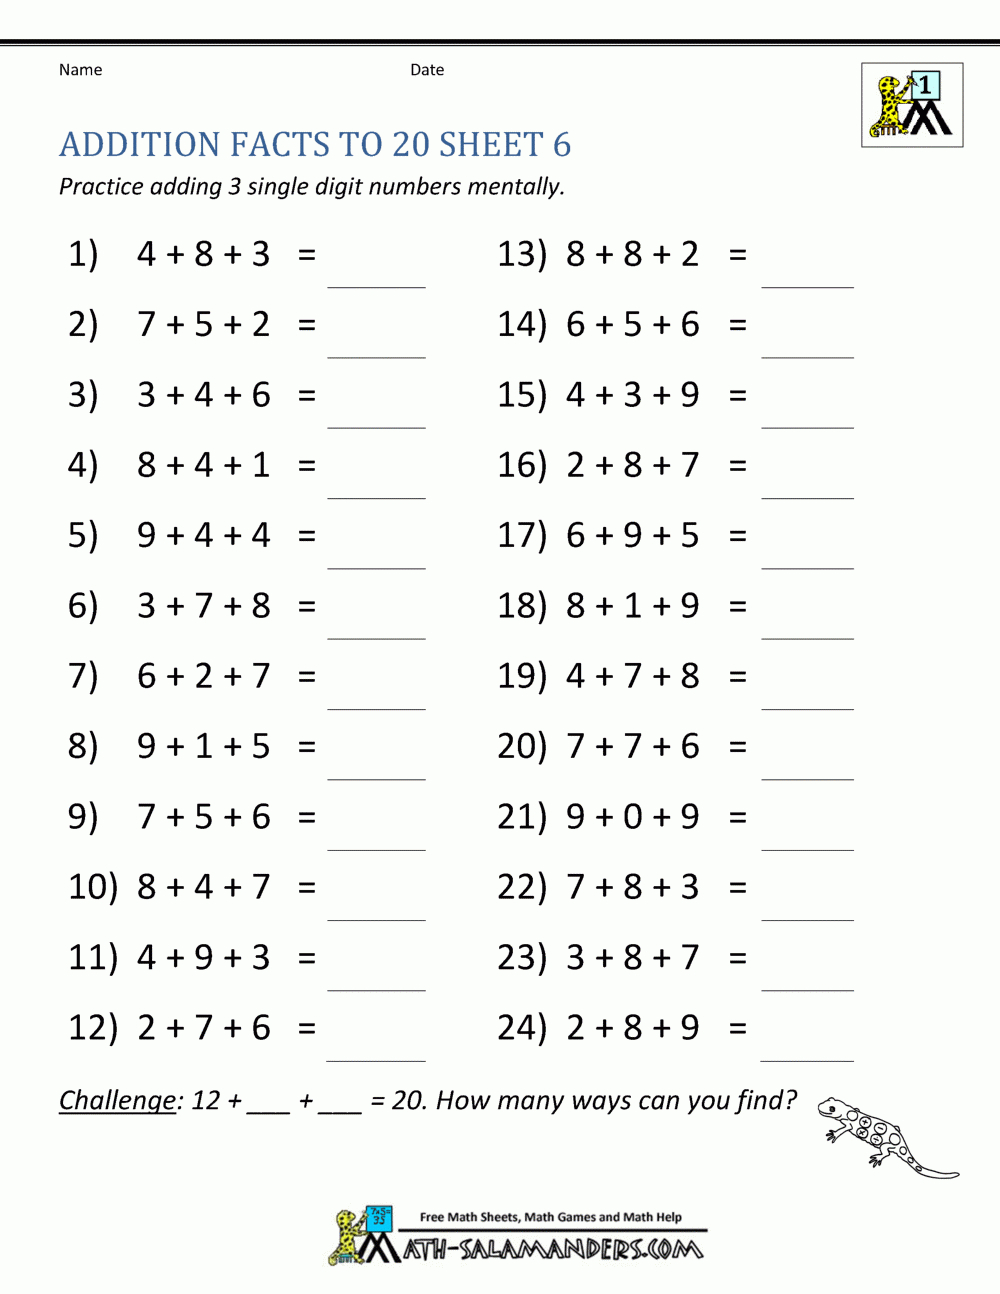 Addition Facts To 20 Worksheets with Printable Multiplication Flash Cards 1-15